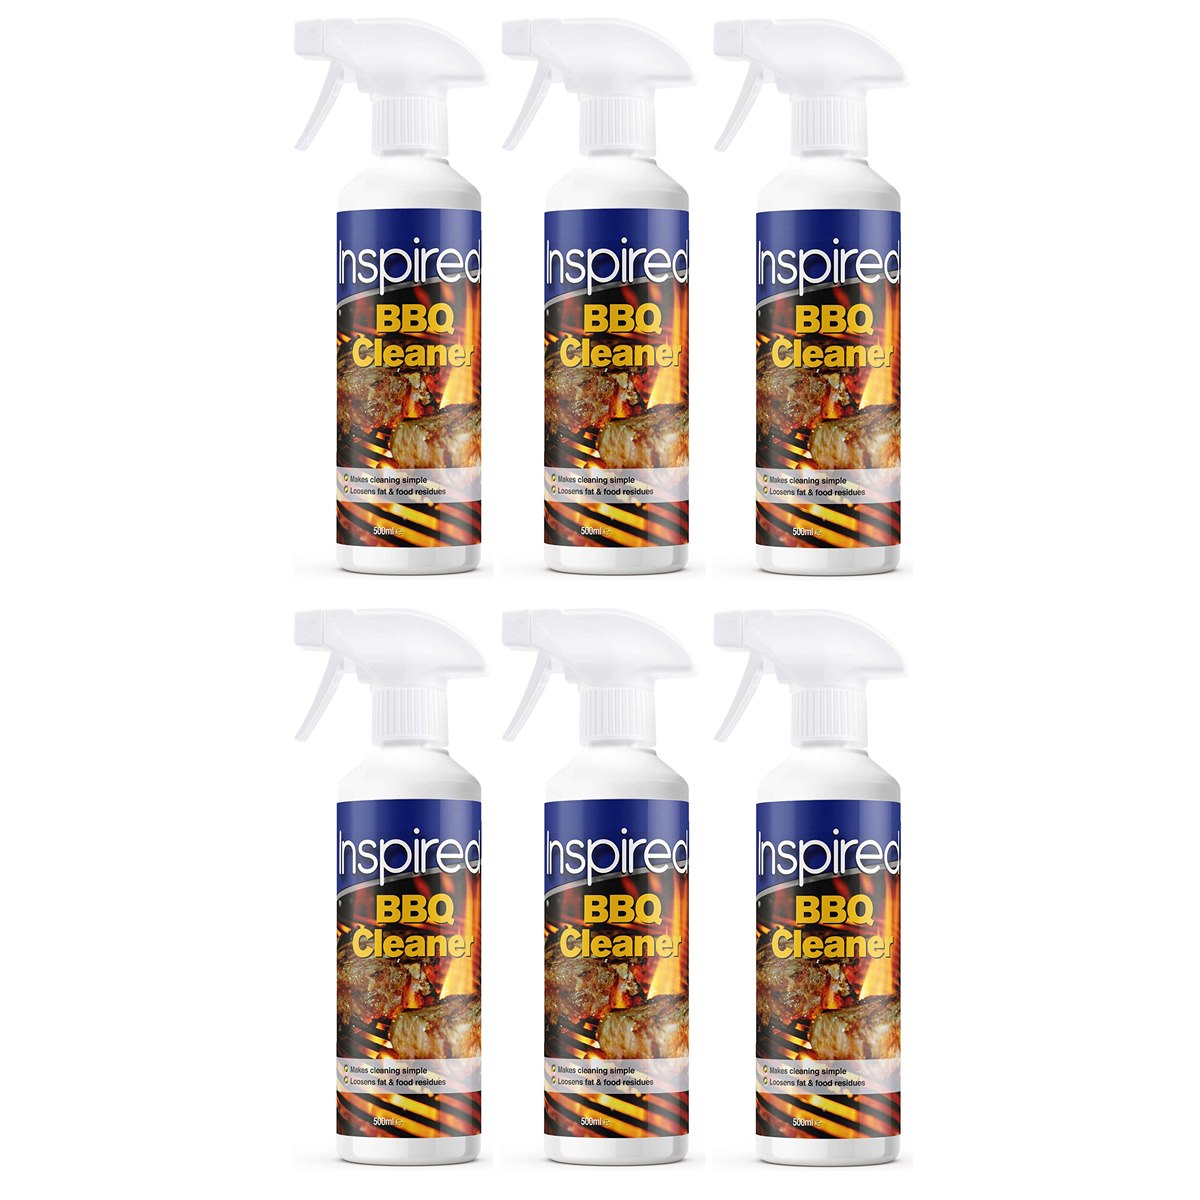 Case of 6 x Inspired BBQ Cleaner Spray 500ml